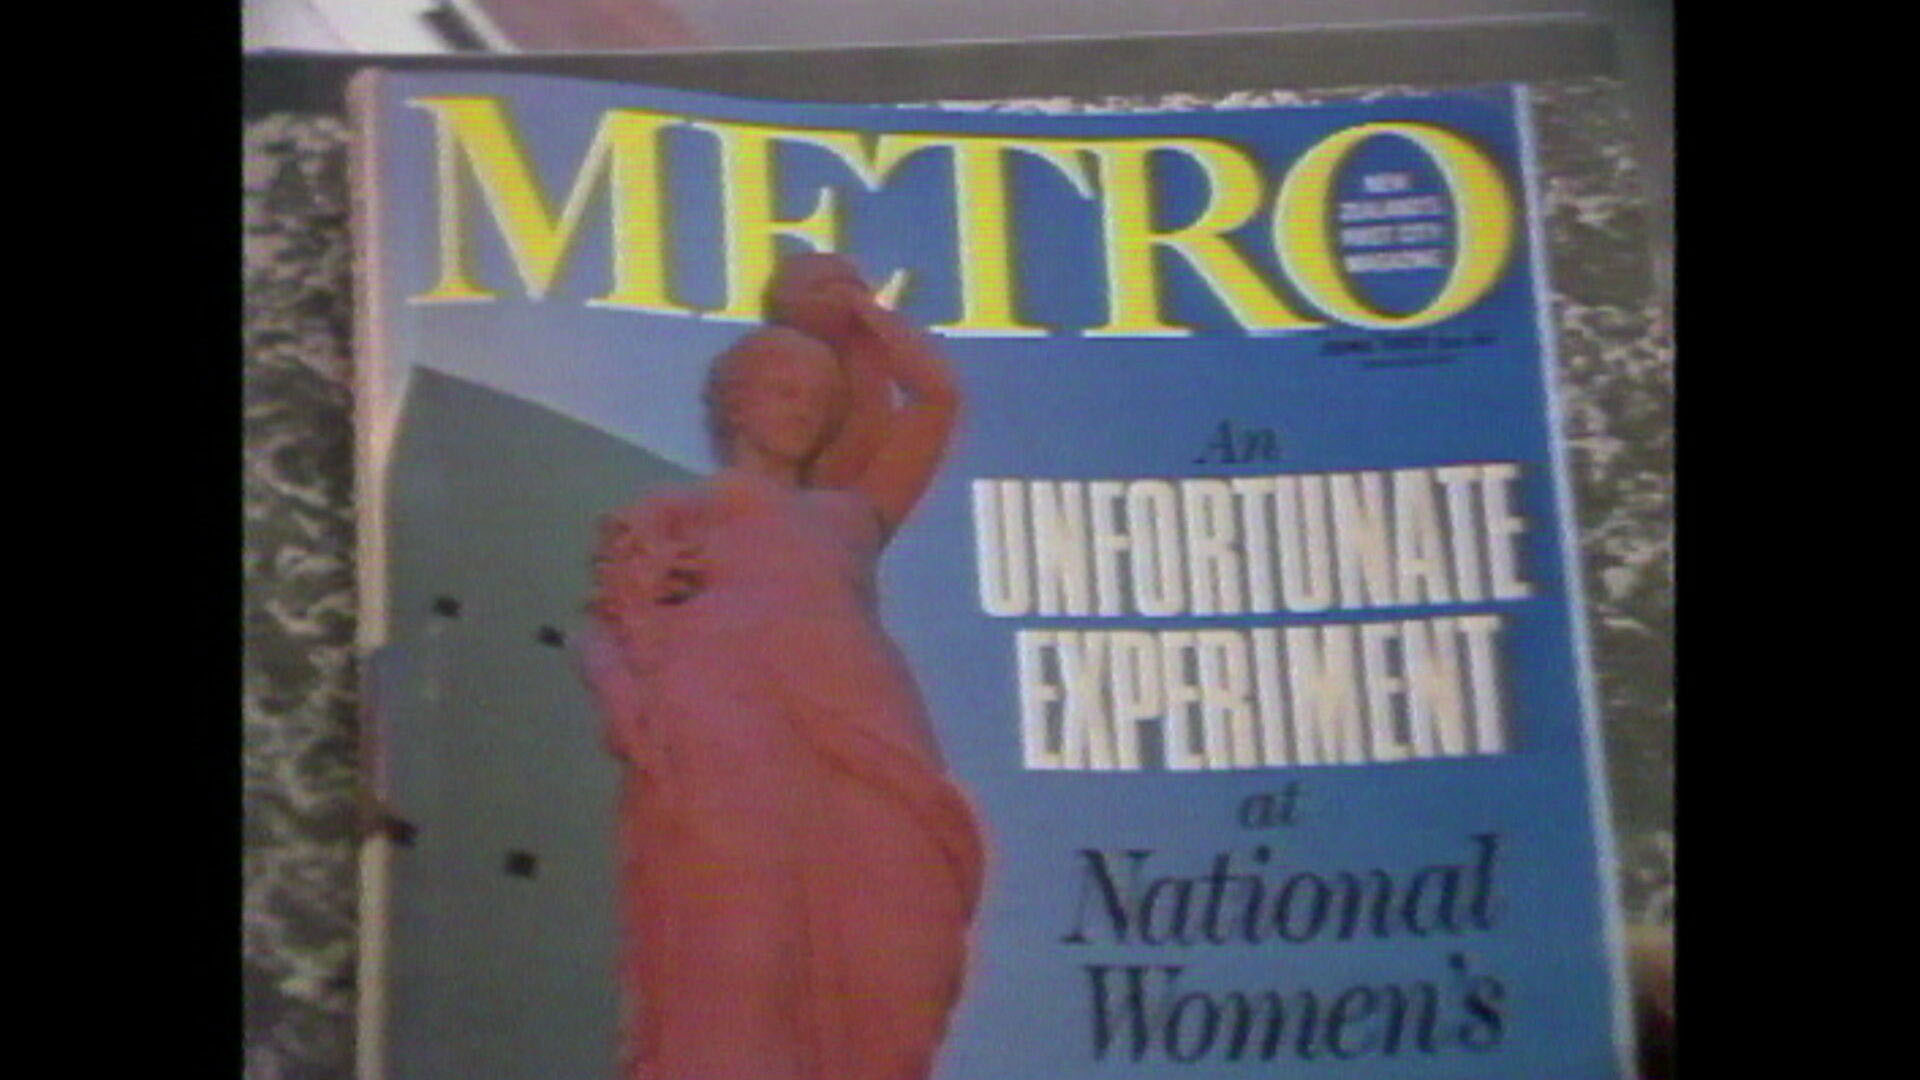 An Unfortunate Experiment, published in Metro magazine.